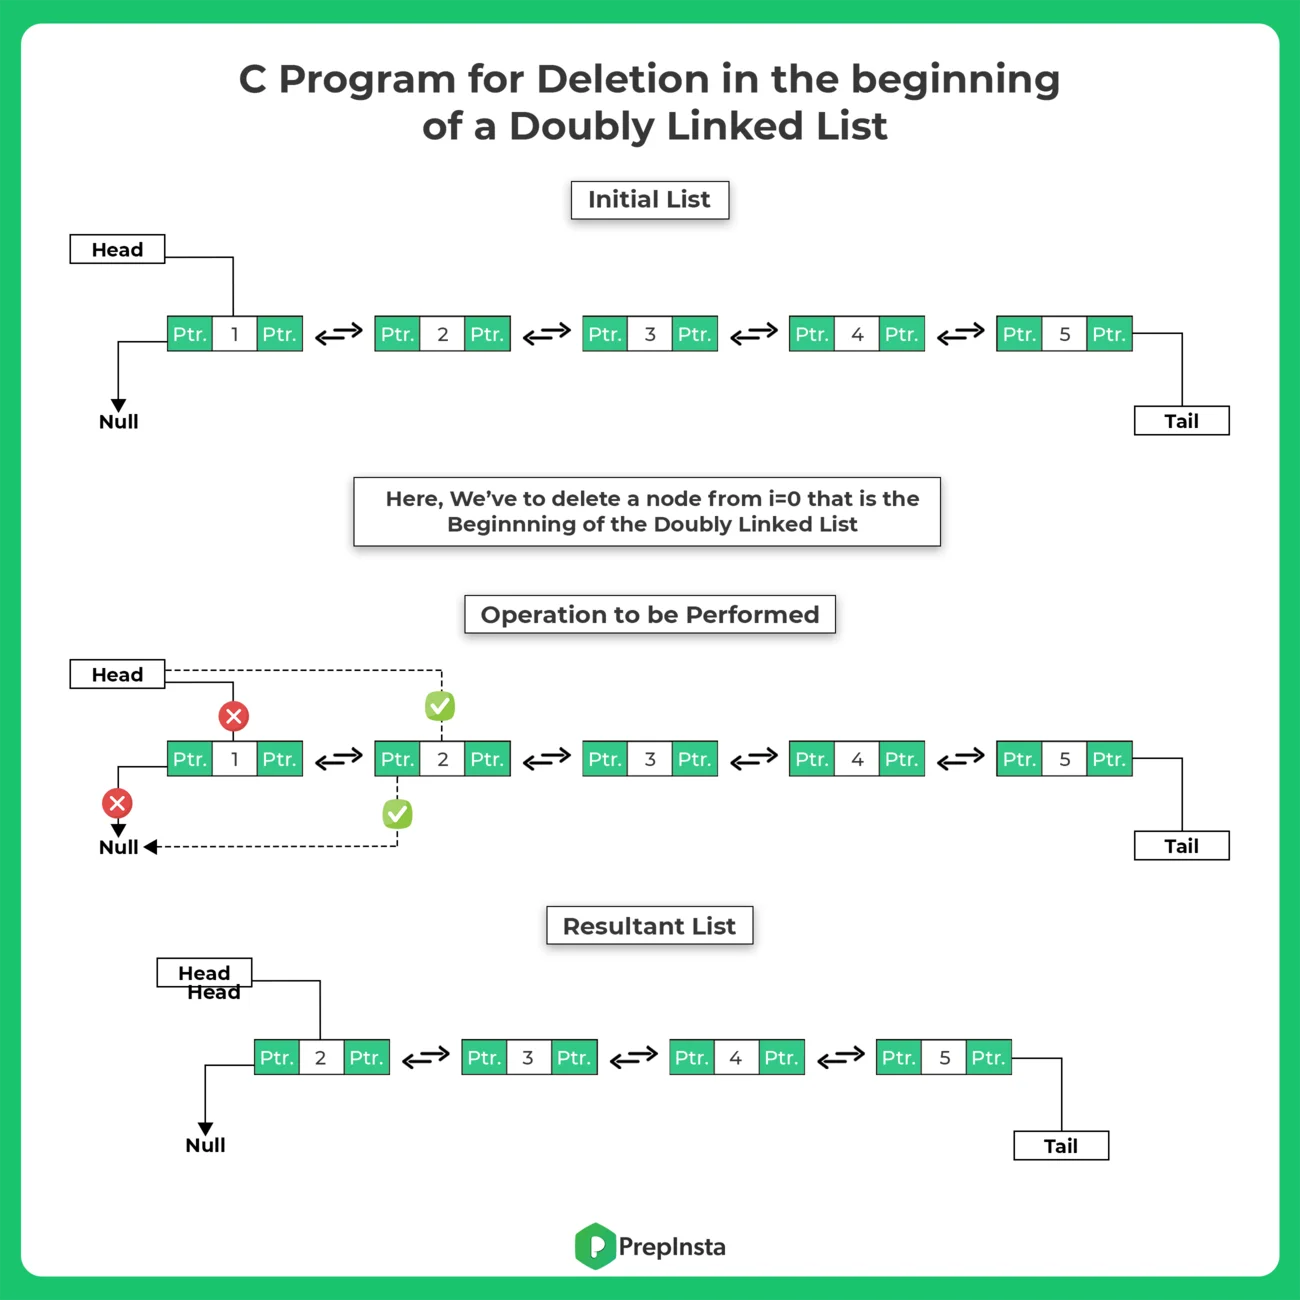 C Program for Deletion from beginning in Doubly Linked list